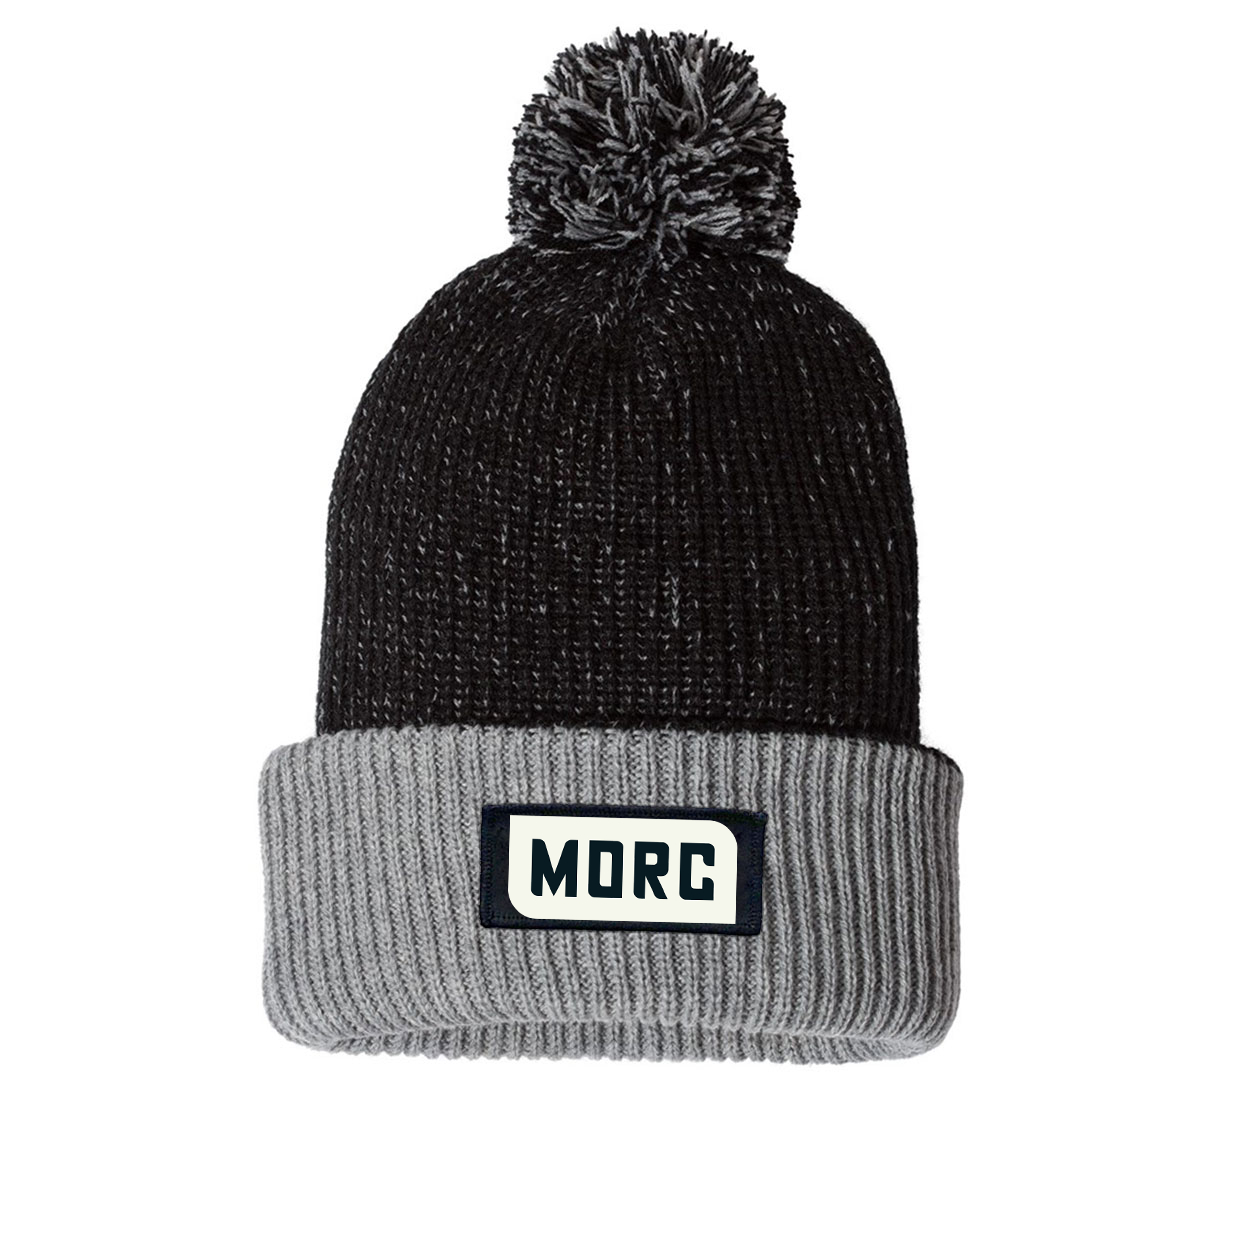 MORC Night Out Woven Patch Roll Up Pom Knit Beanie Black/Gray